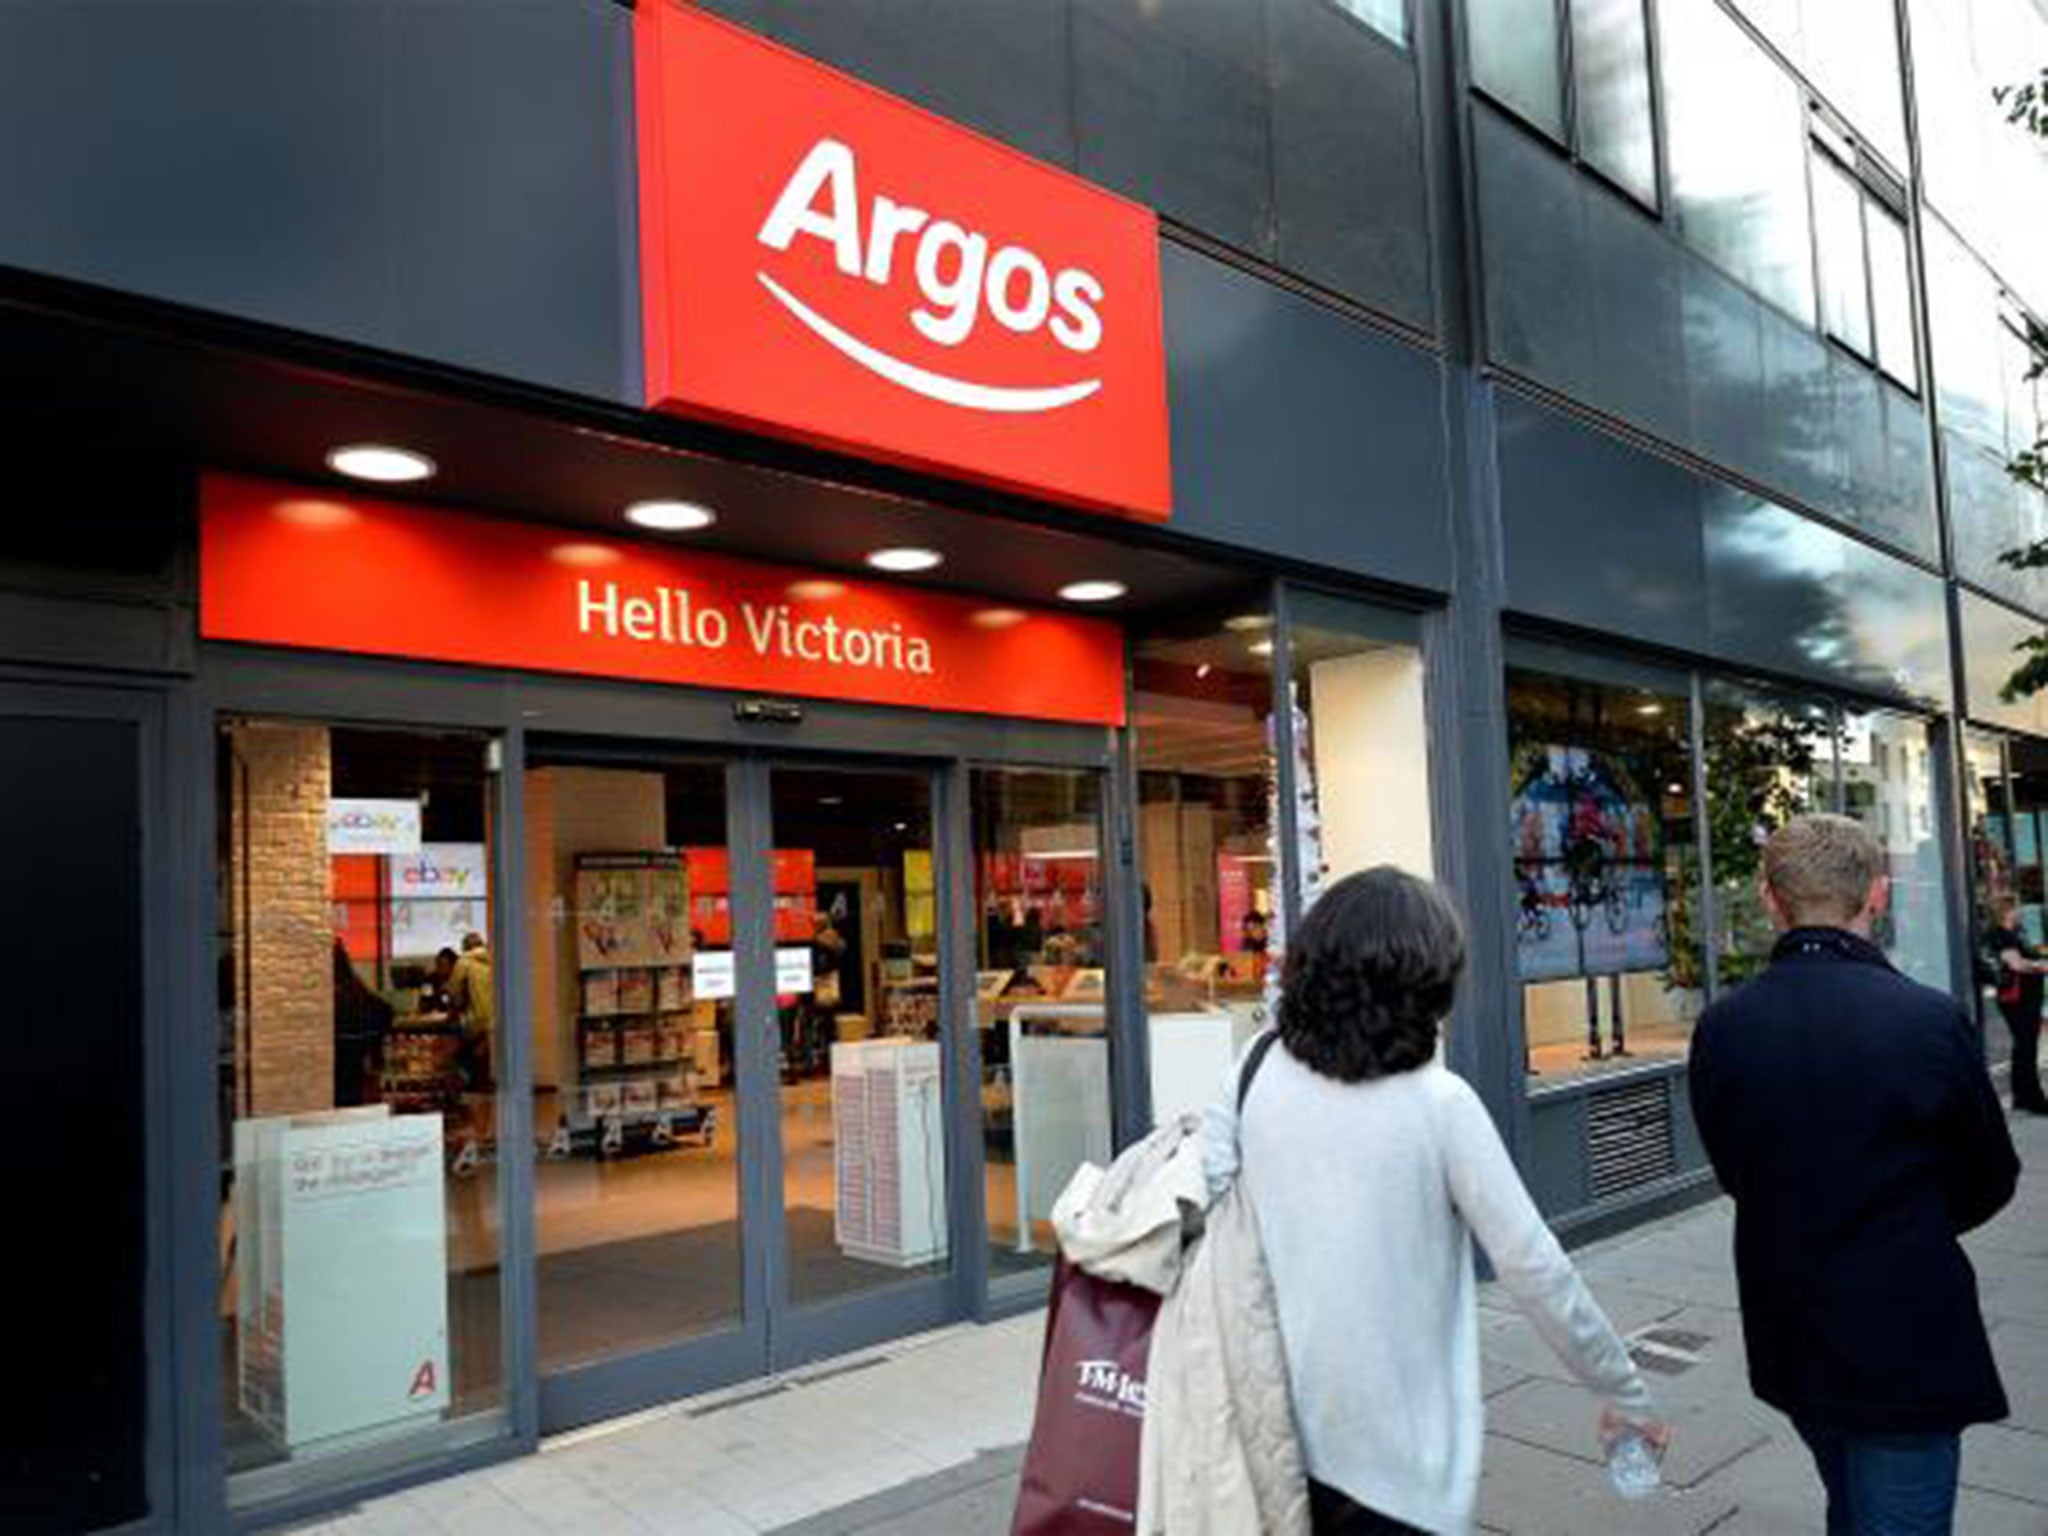 The deal should be completed in the third quarter of the year and might lead to the closure of up to 200 Argos store